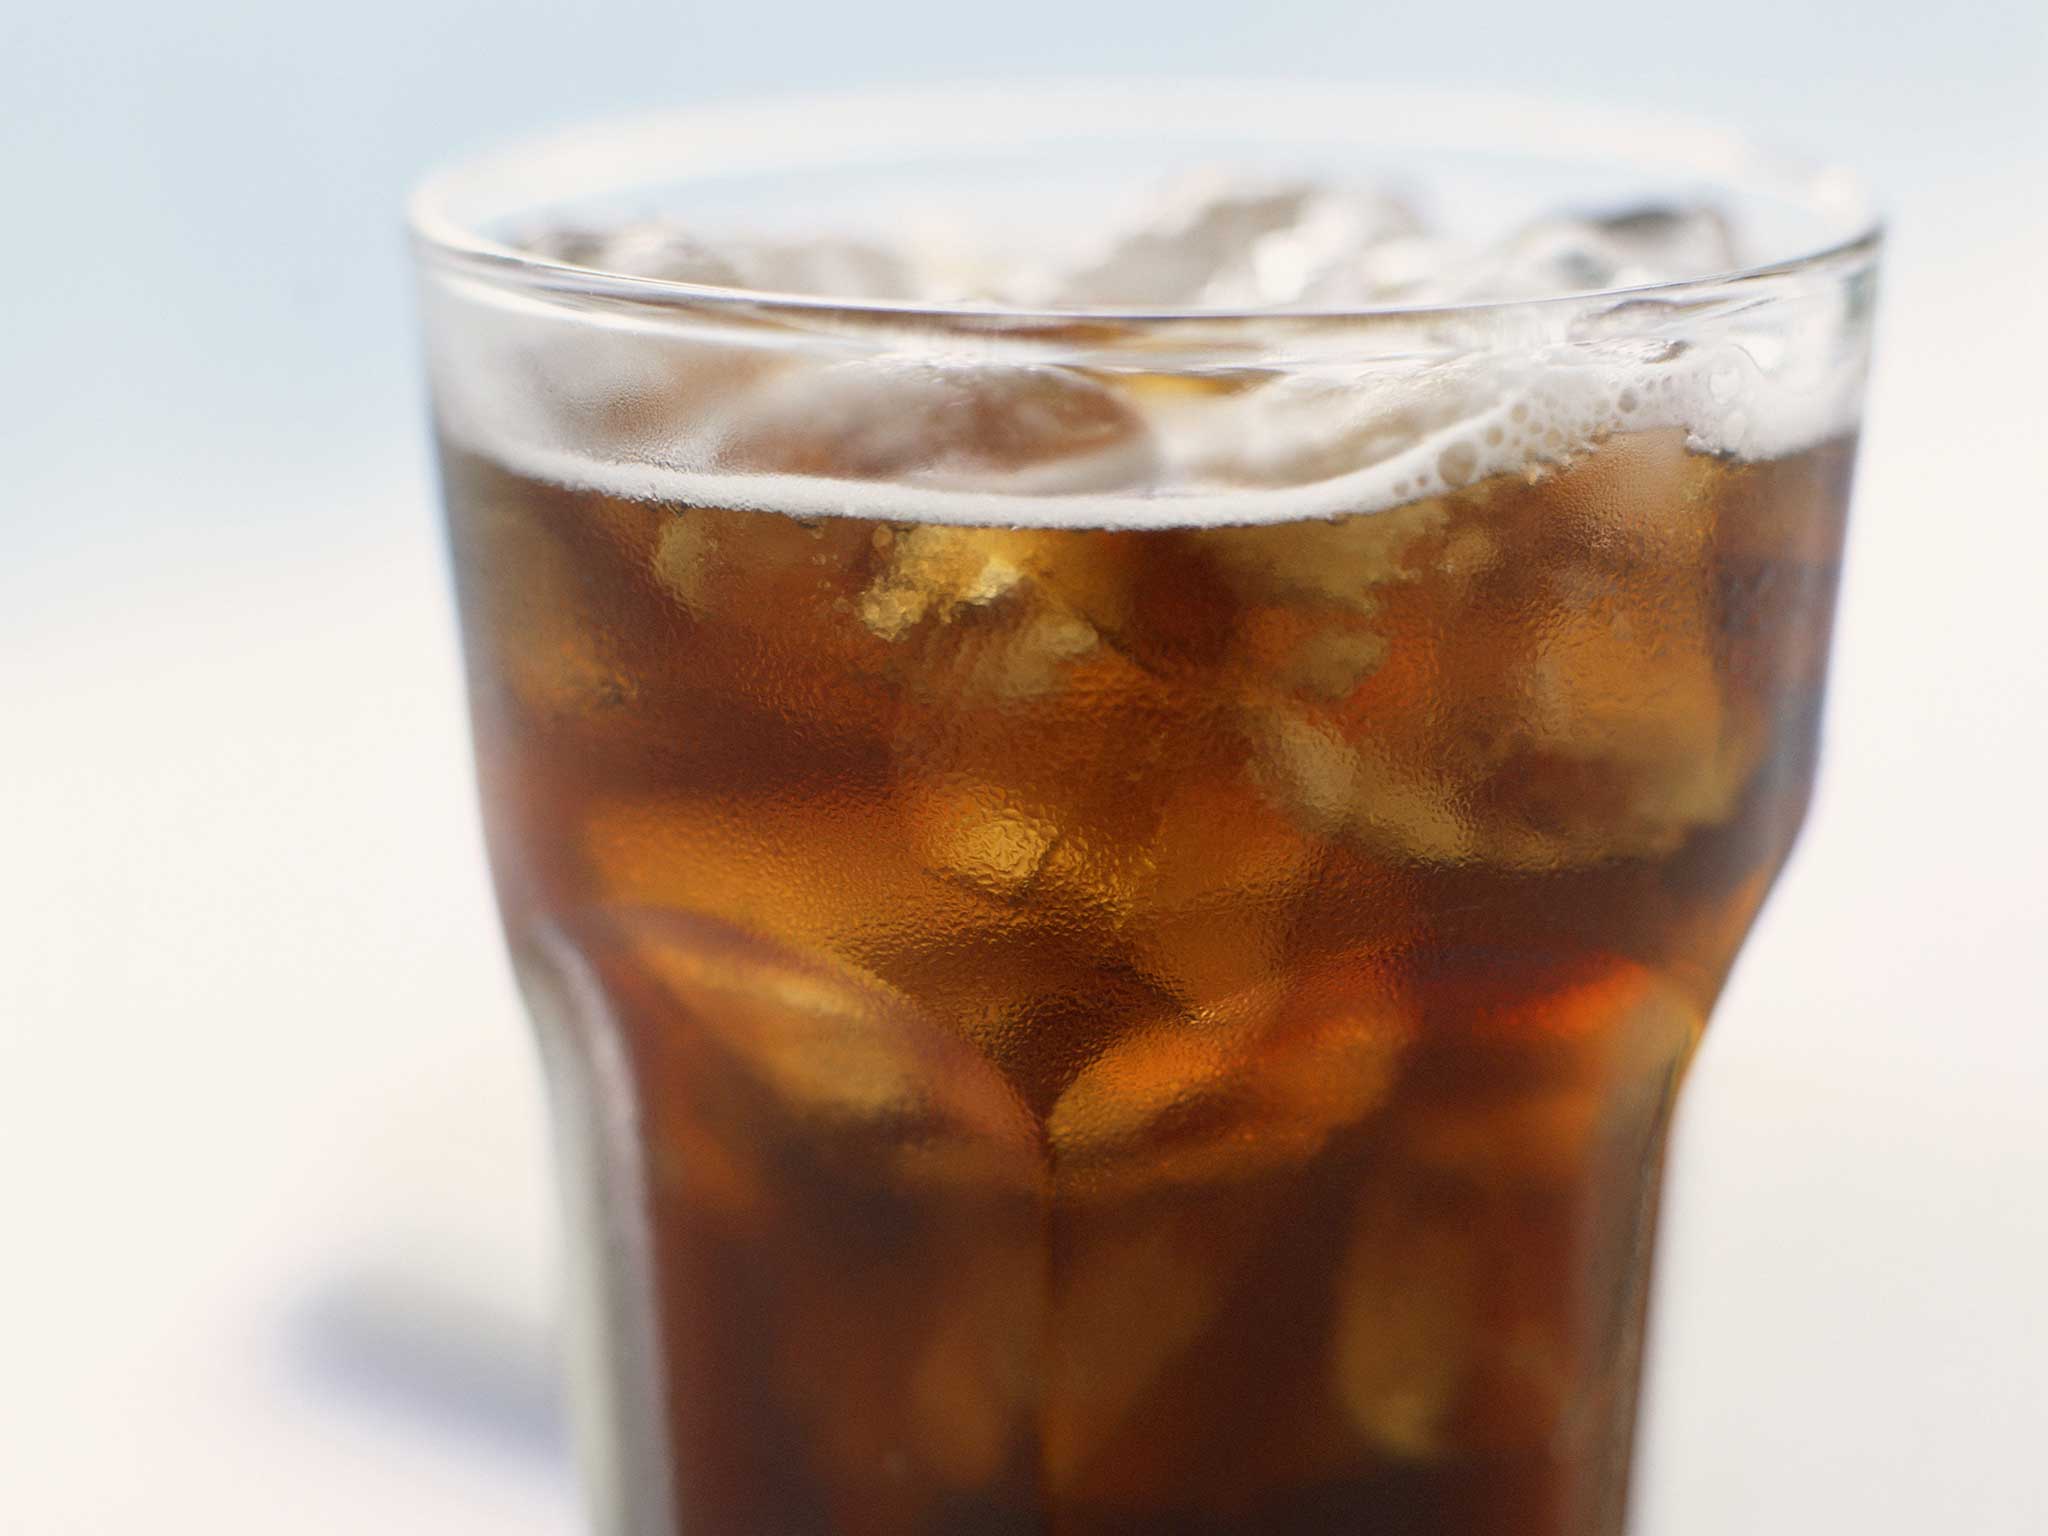 Could sugary drinks help to reduce stress?